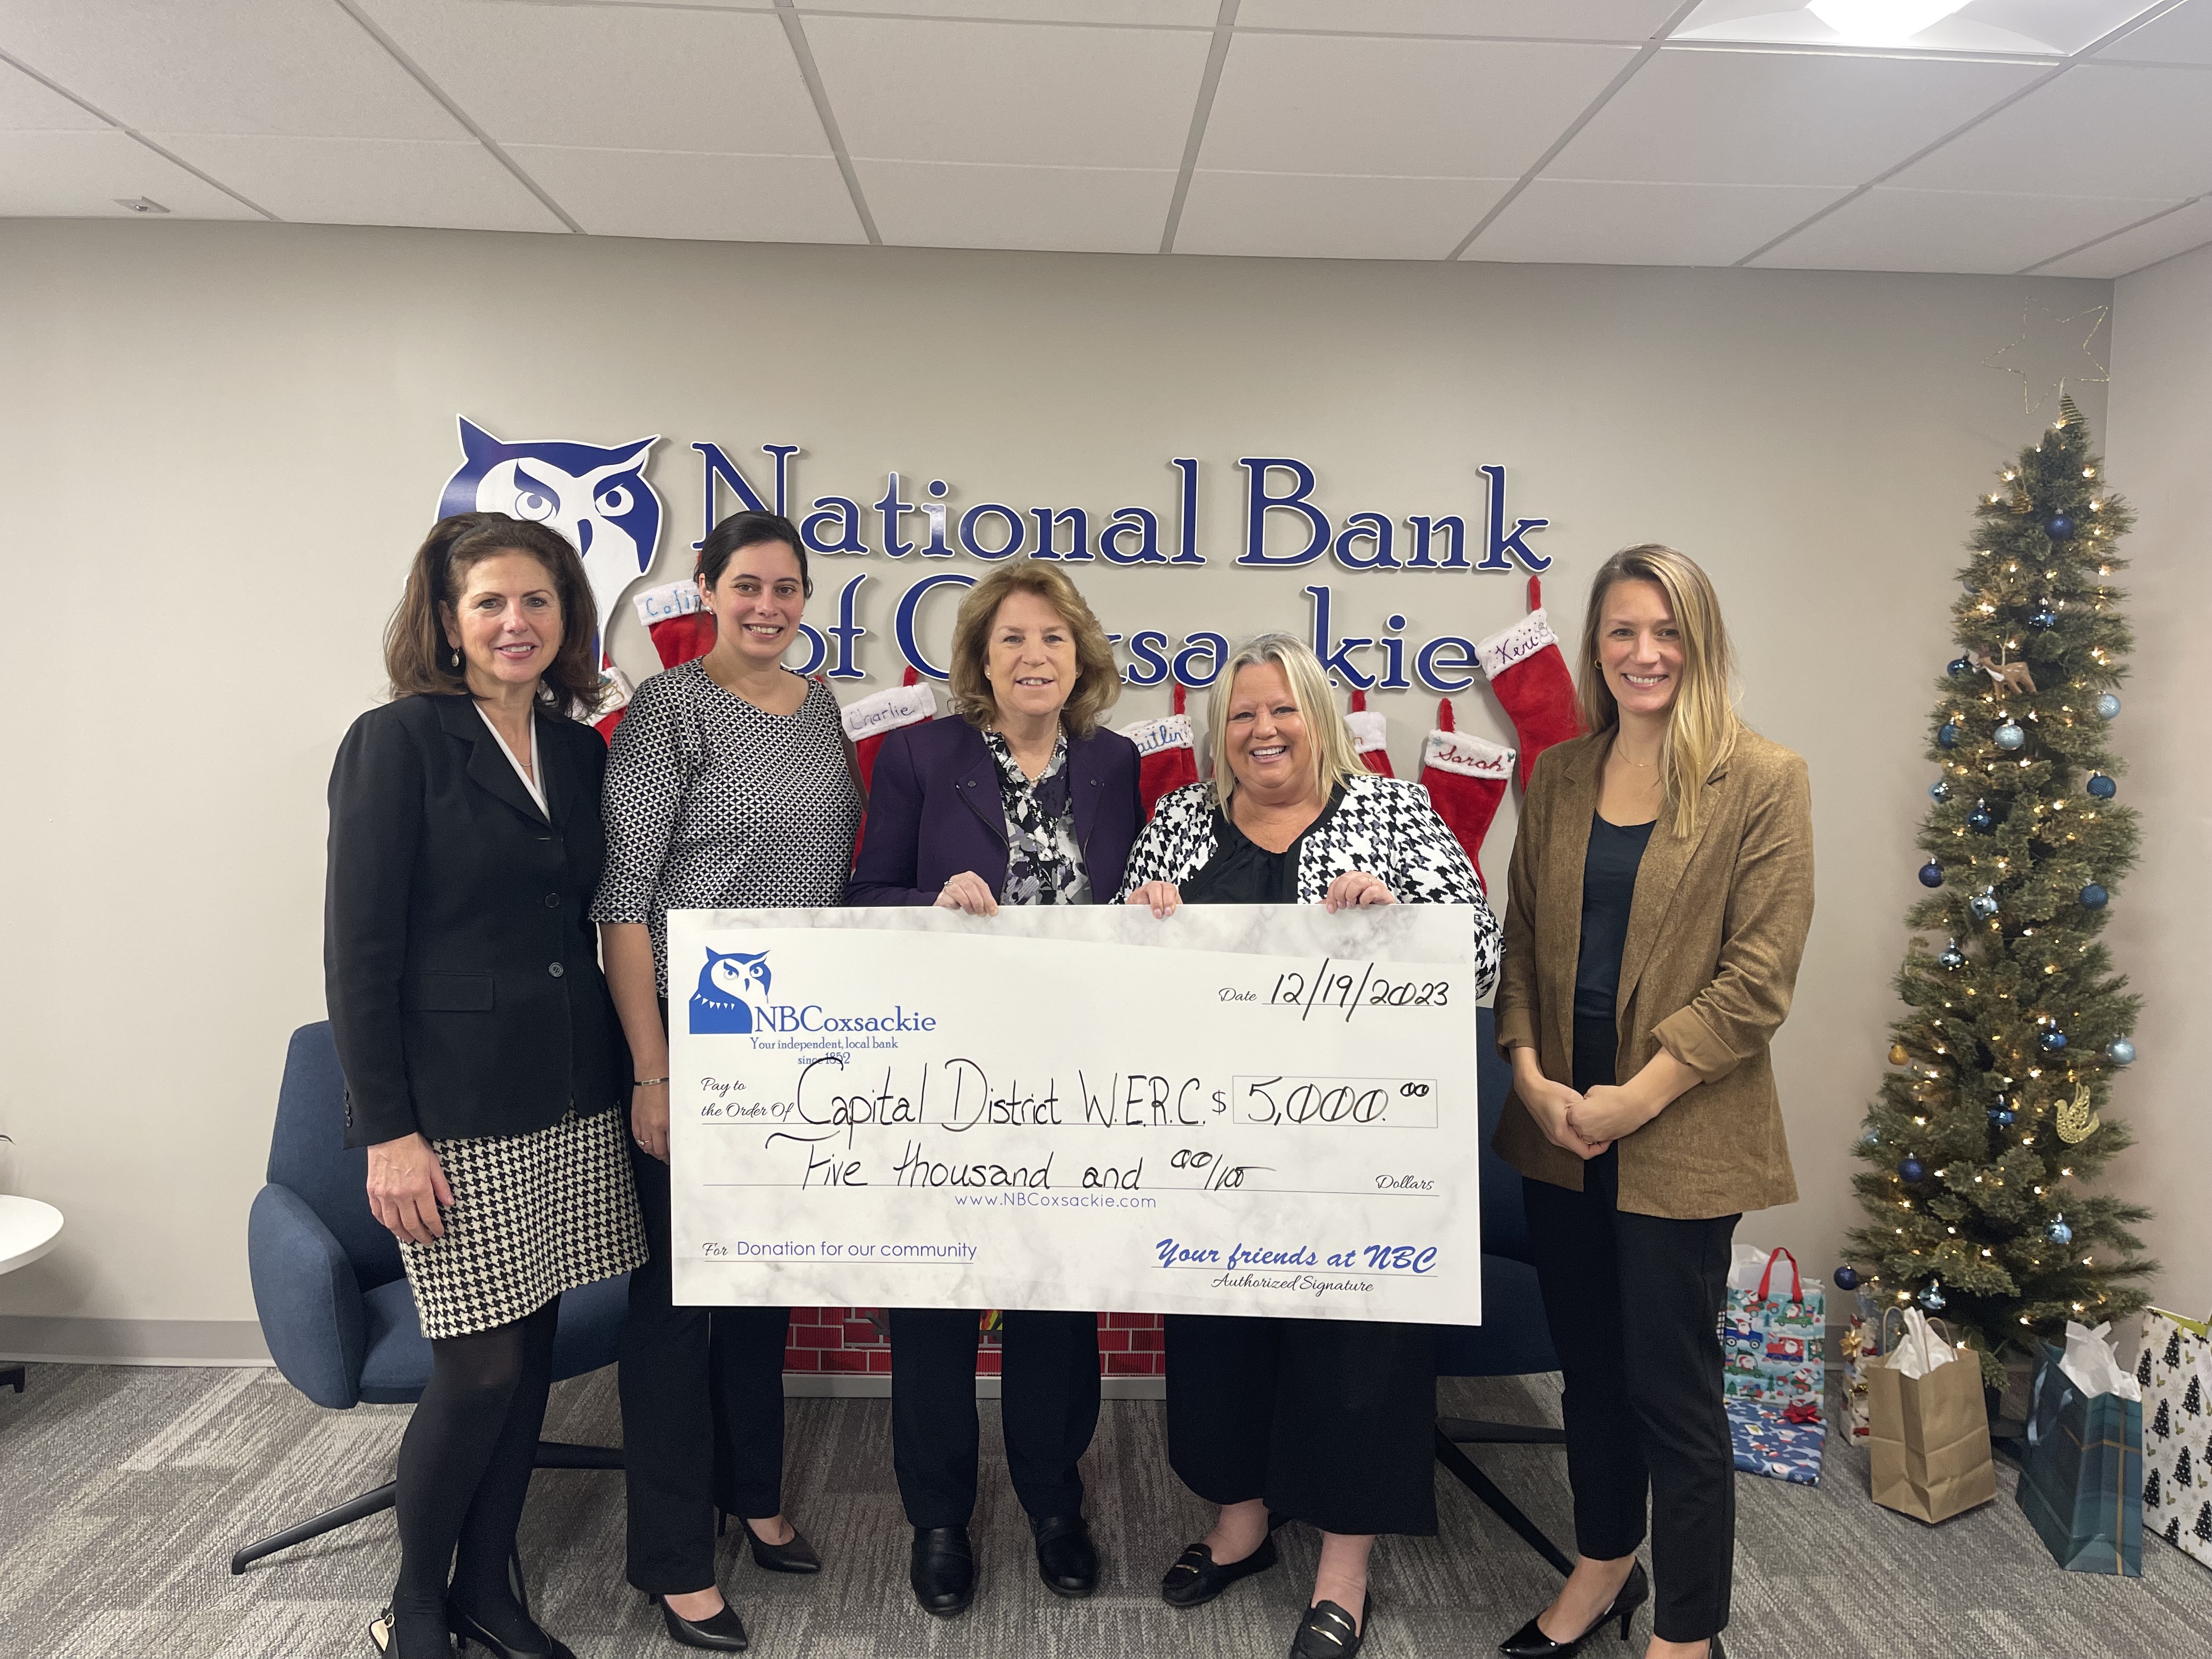 Capital District WERC (Woman’s’ Employment & Resource Center) receives funds from National Bank of Coxsackie